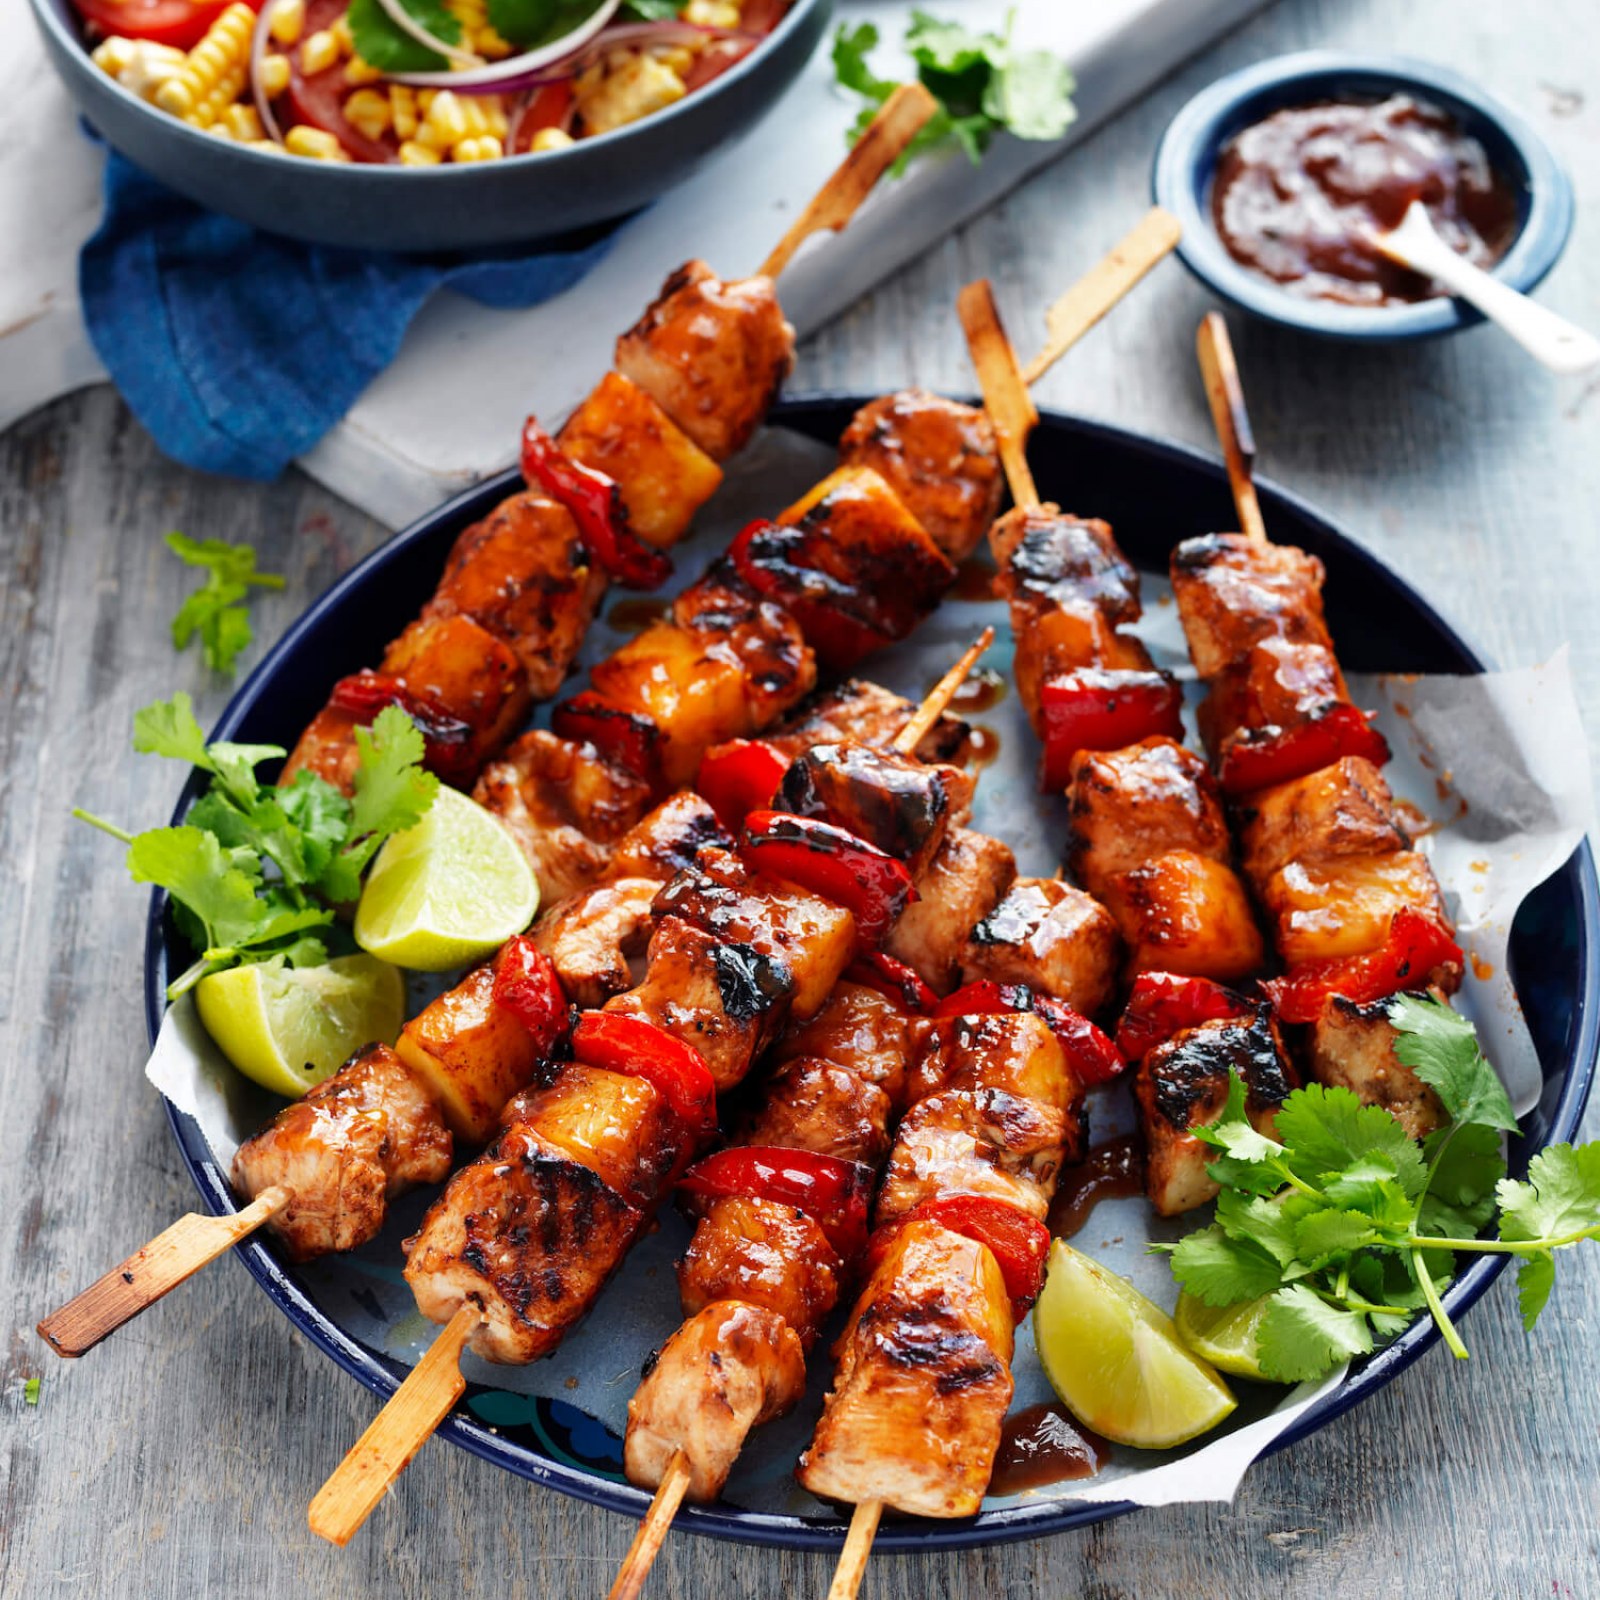 Tips for Using Skewers on the Grill